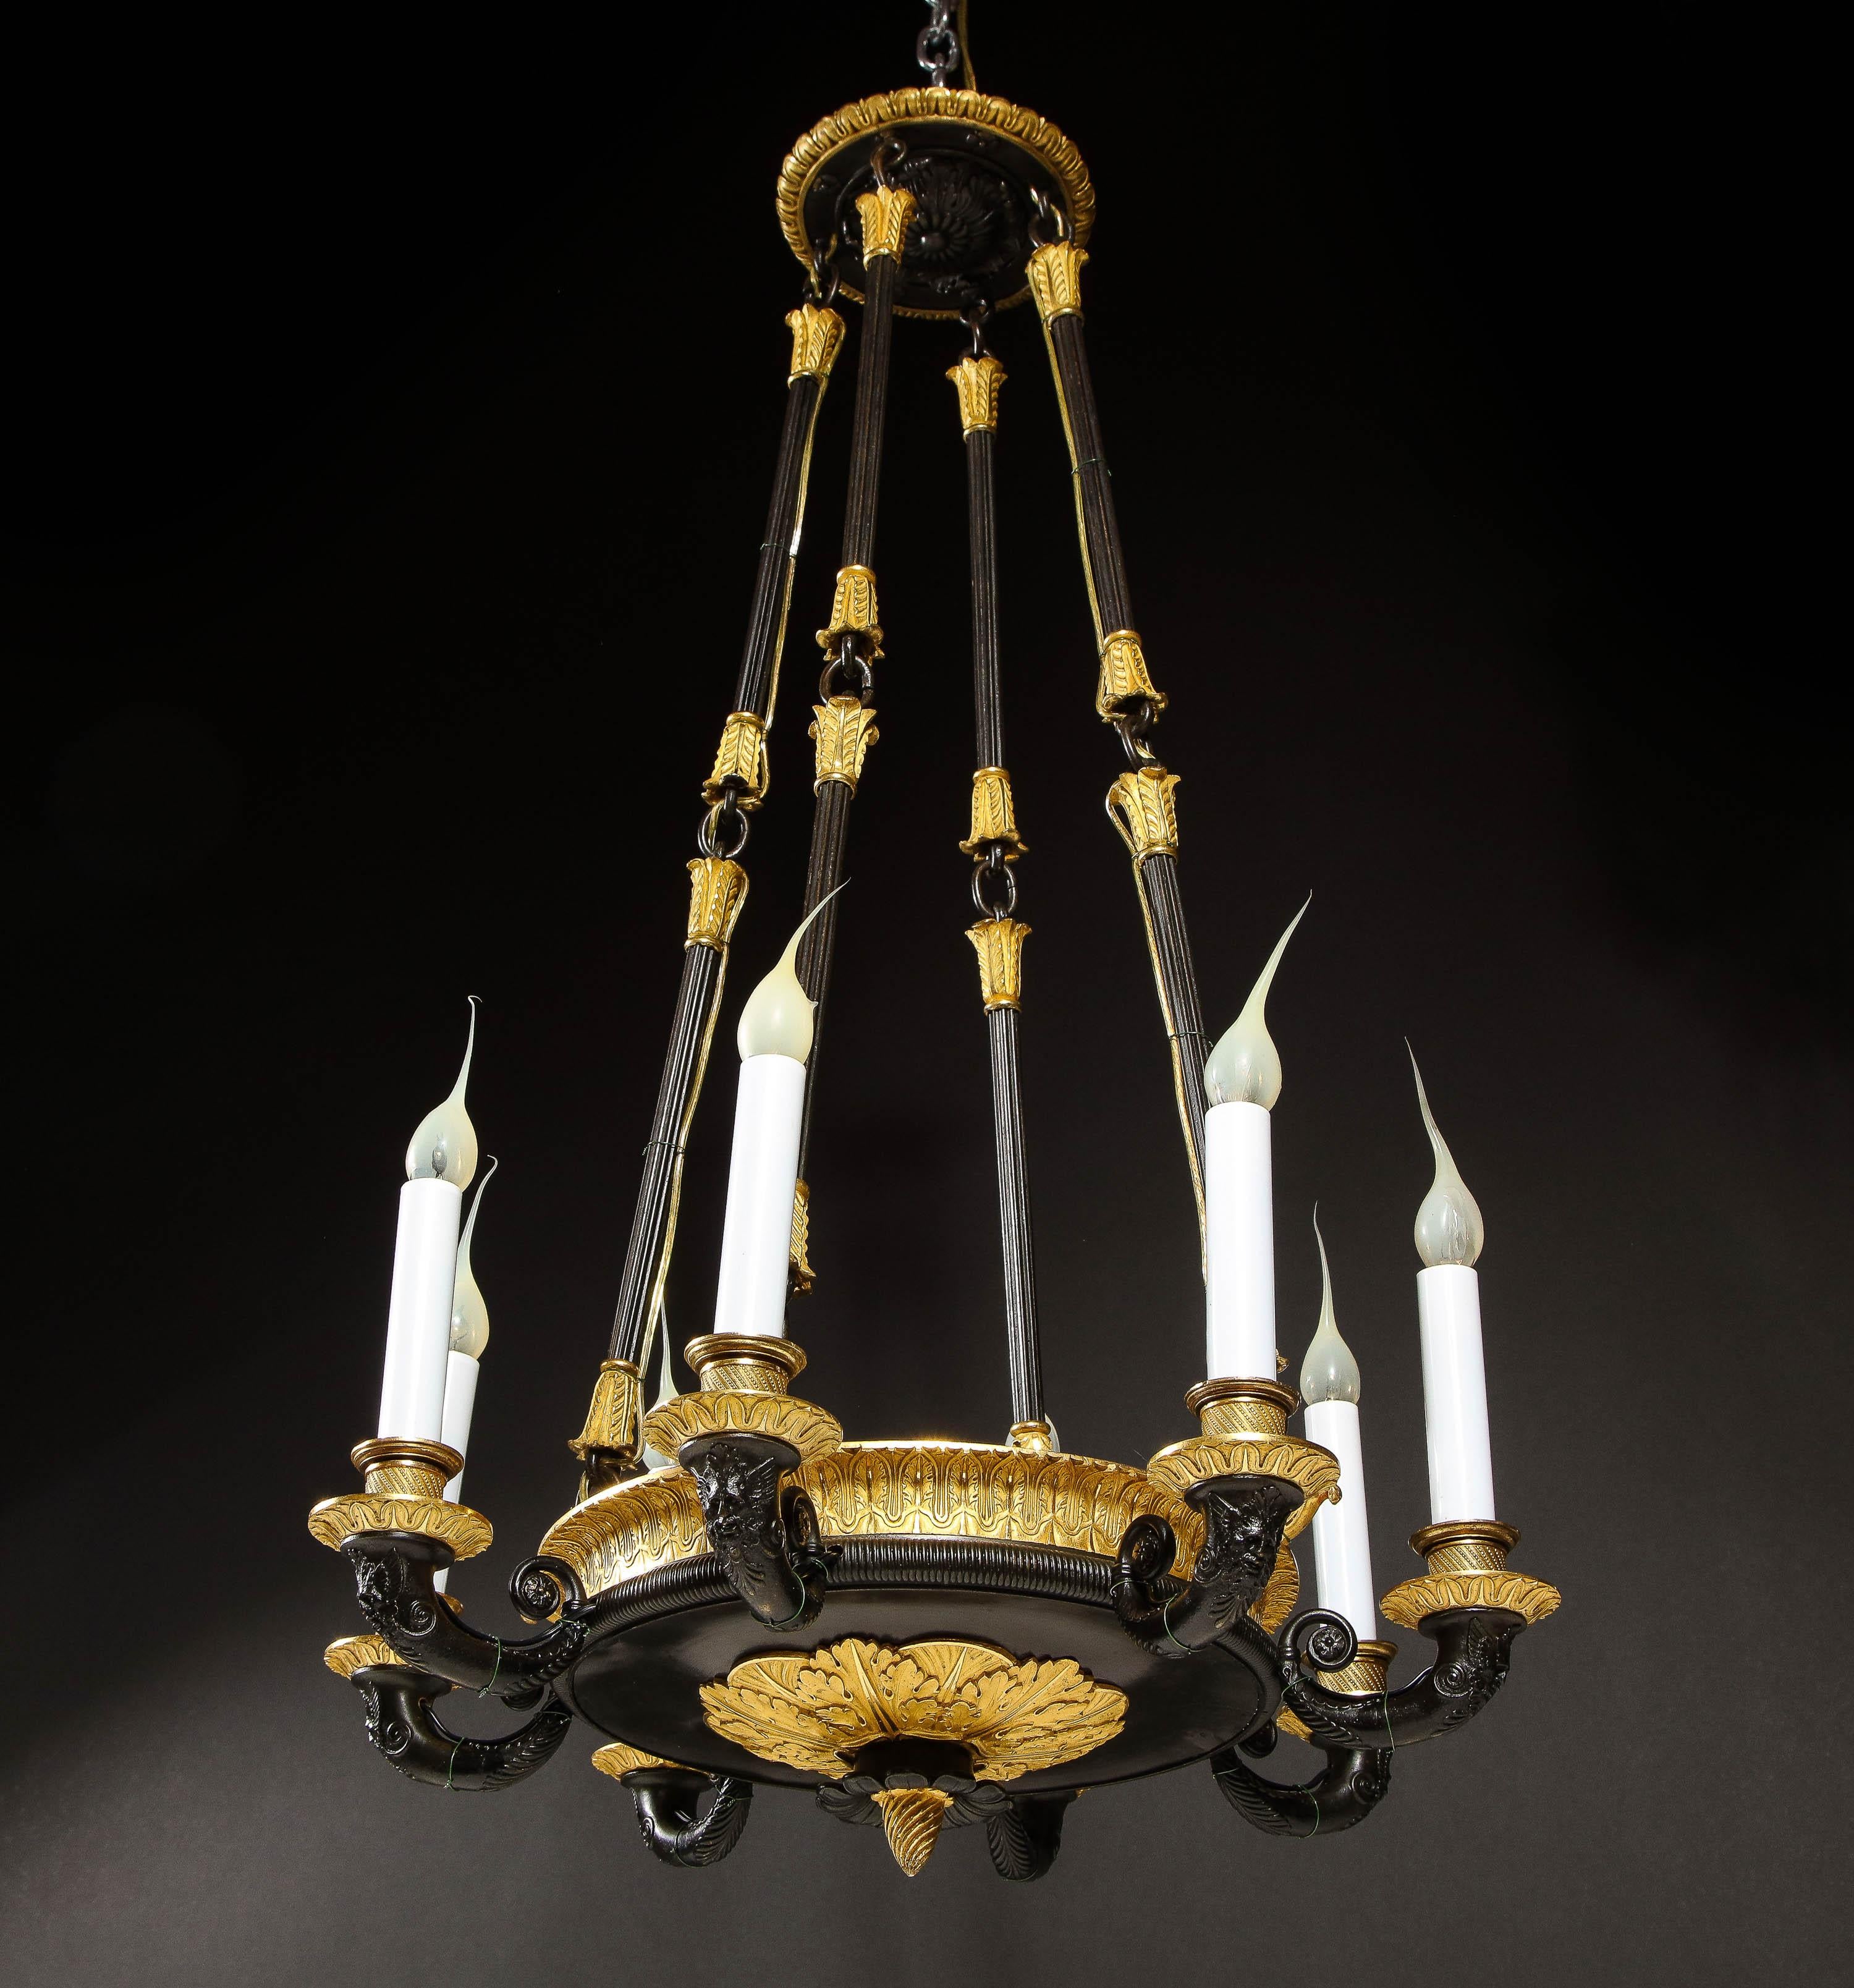 Antique French Empire Style Gilt and Patinated Bronze Chandelier In Good Condition For Sale In New York, NY